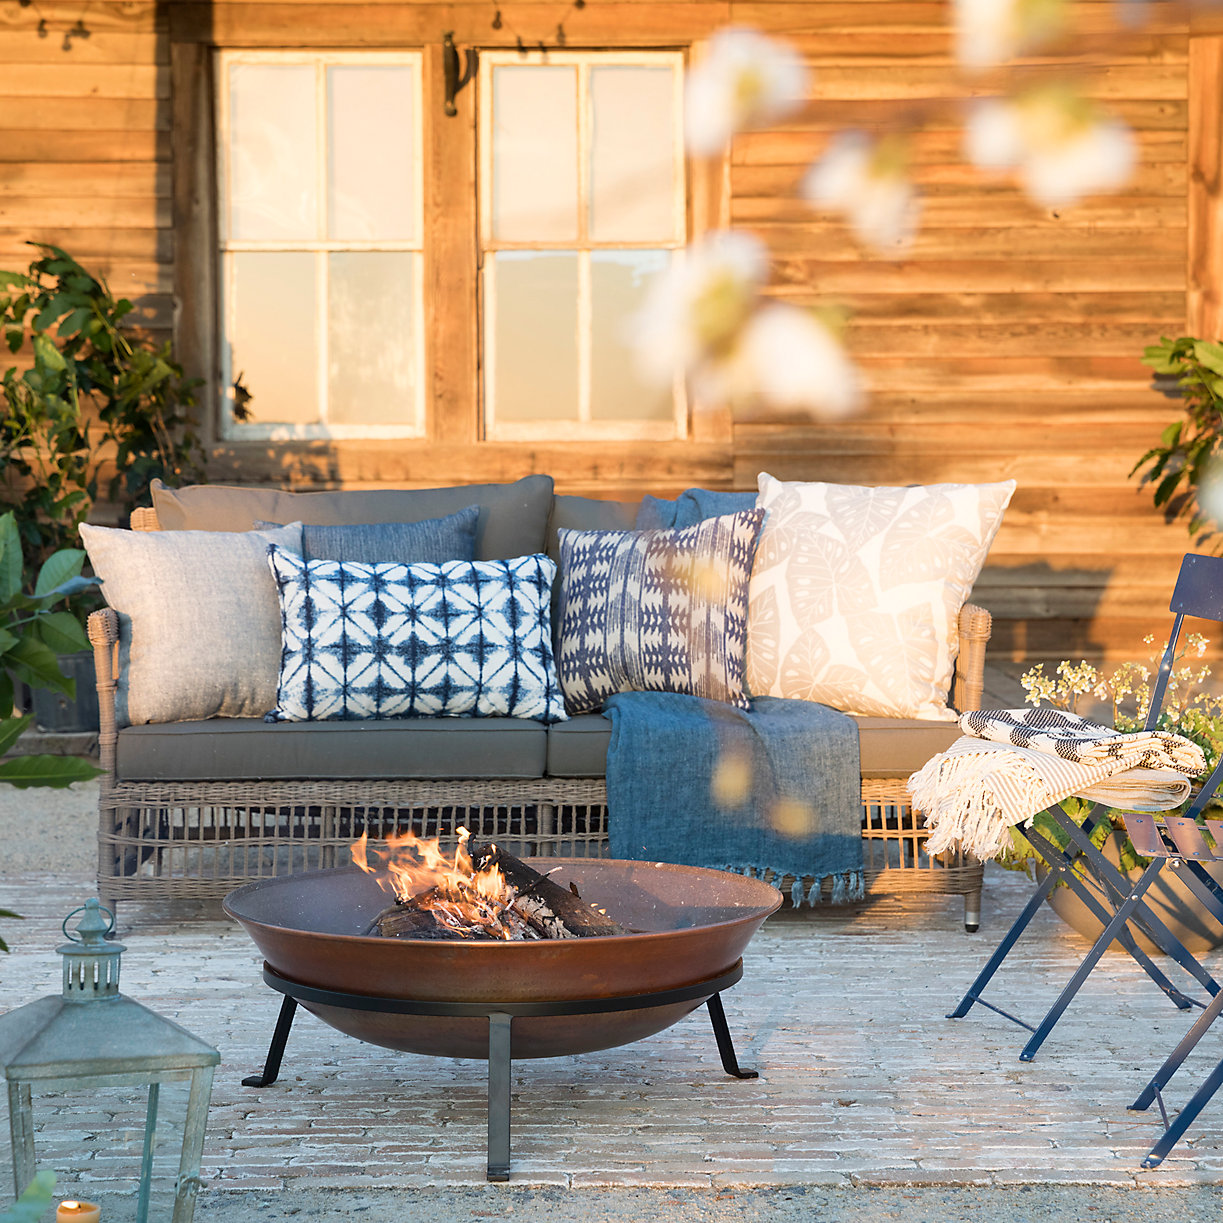 Bohemian-inspired outdoor living space.